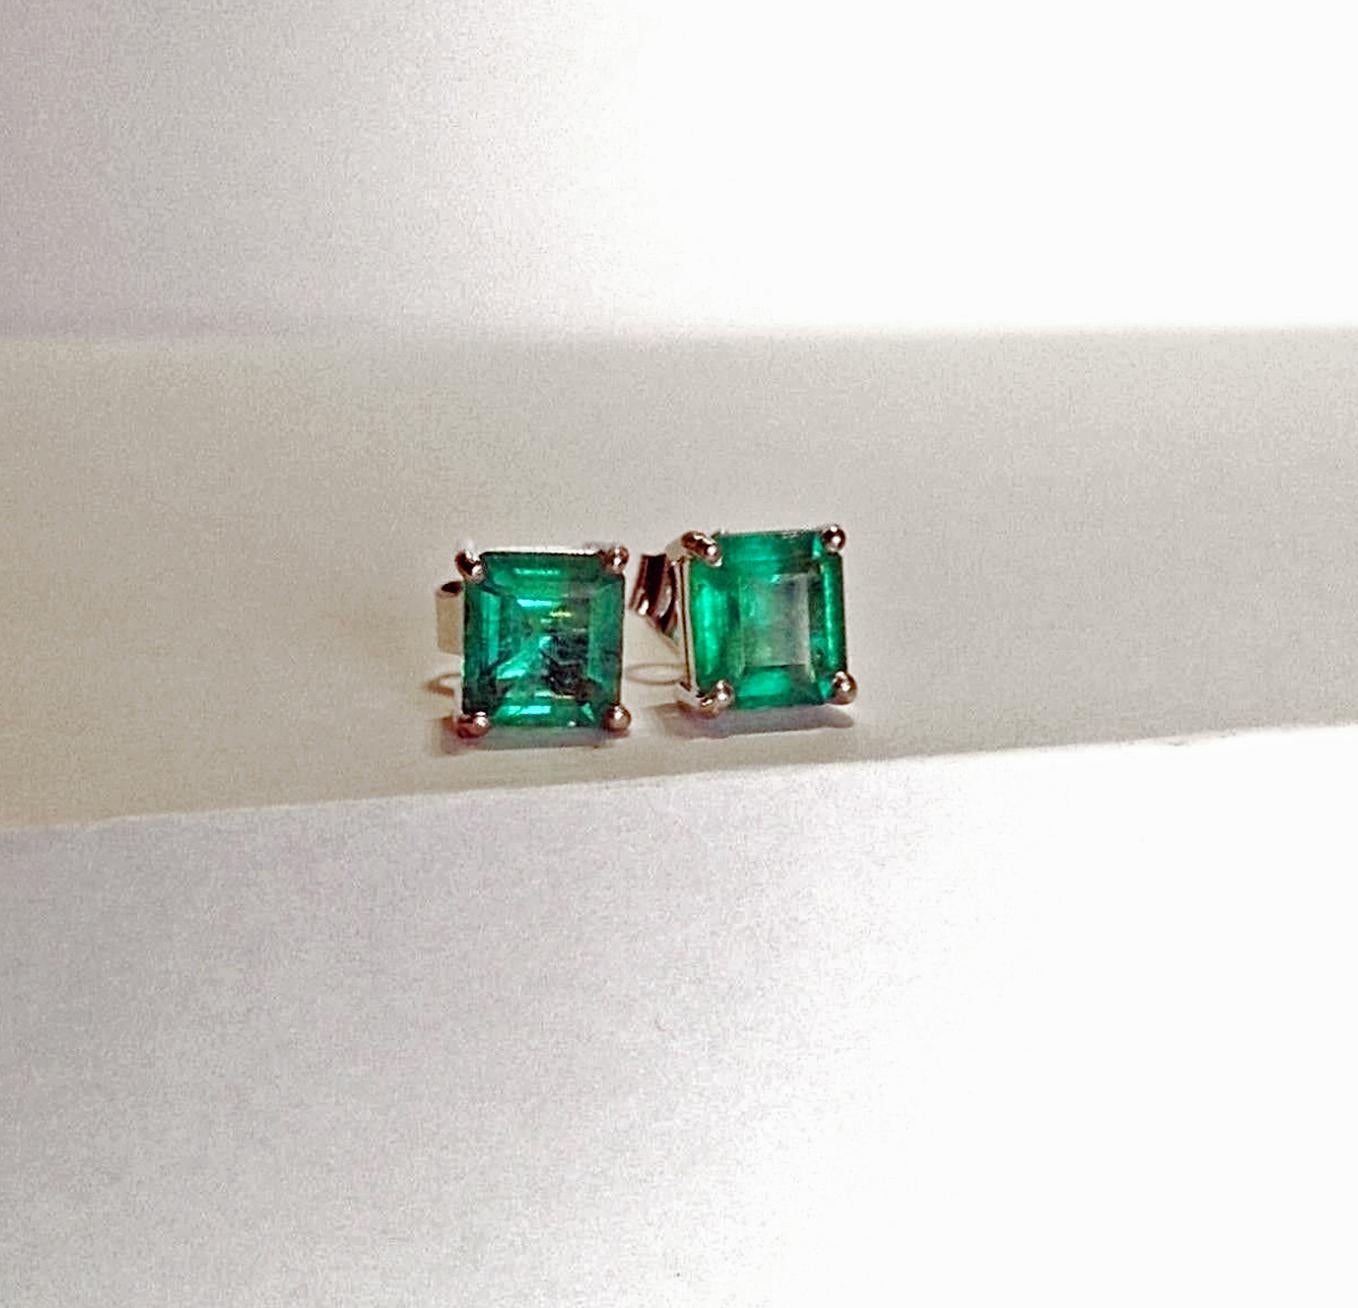 Primary Stones: 100% Natural Colombian Emeralds
Color/Clarity : AAA+ EXTRA FINE Medium Green Color/ Clarity, VS
Total Gemstones Weight:  1.35 carats
Shape or Cut : Emerald Cut
Earrings Measurement: 5.15mm x 4.95mm
Comments: Gorgeous Color &